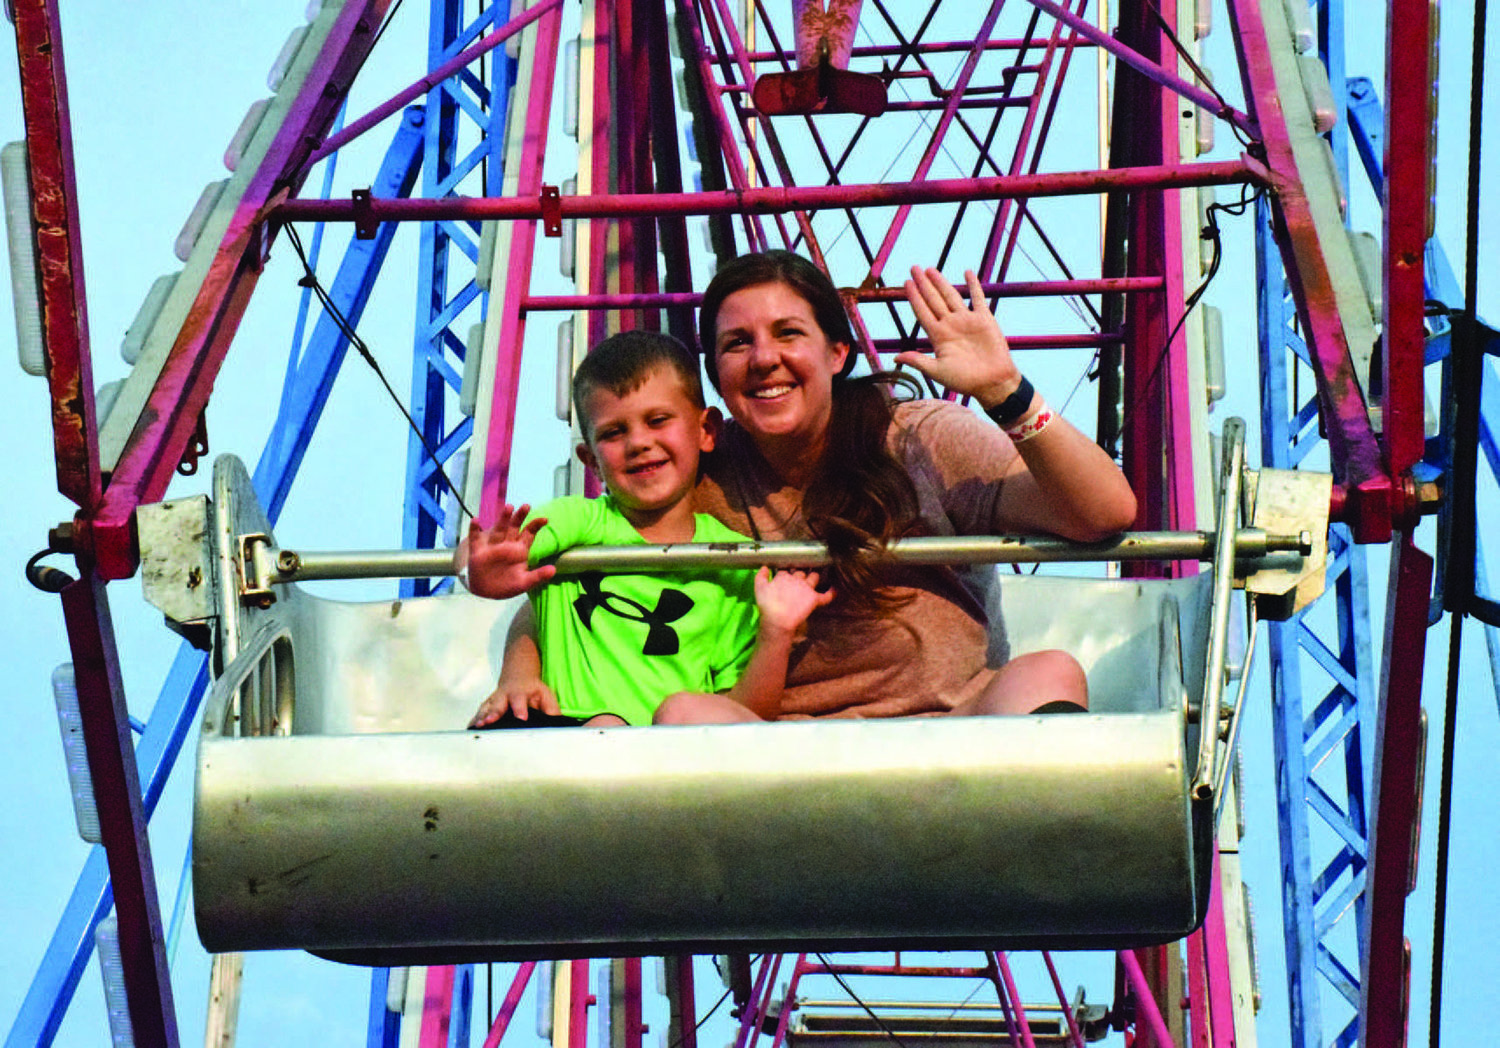 July: Heather McKiernan of Hilltown rides the Ferris wheel with her son, Rowan, at the Sellersville Fire Department carnival.